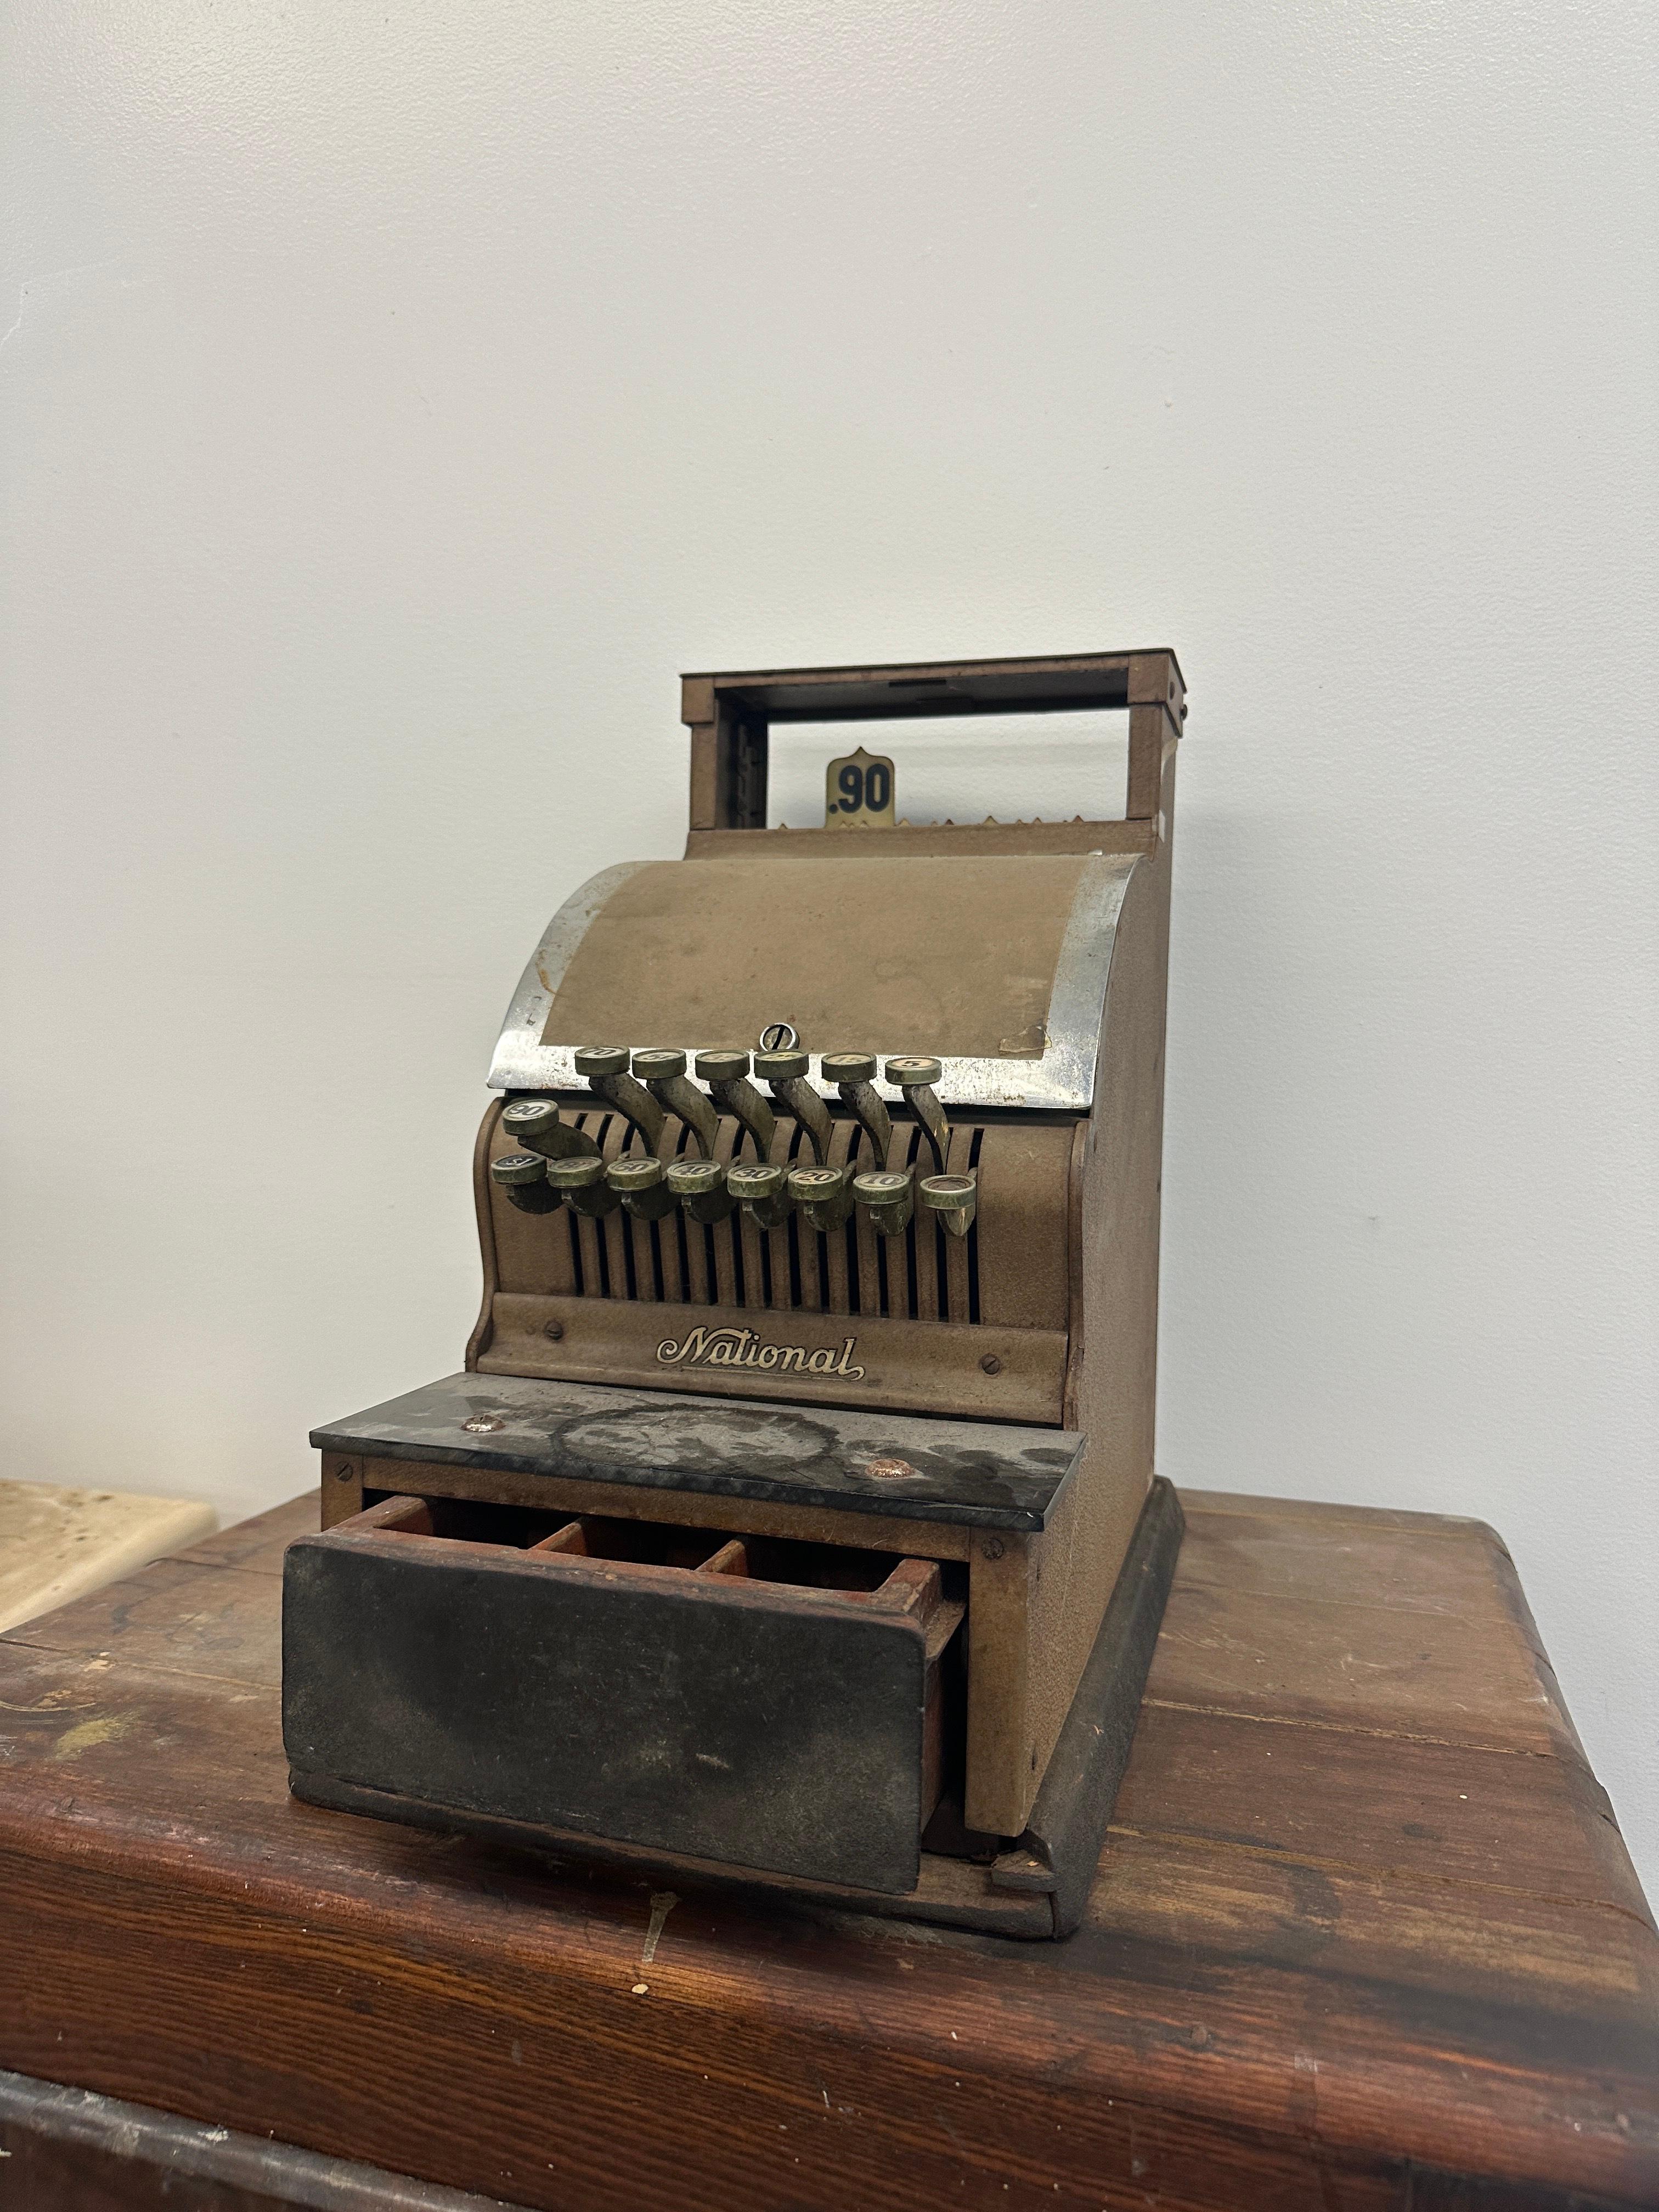 Vintage condition national cash register from the early 20th century.